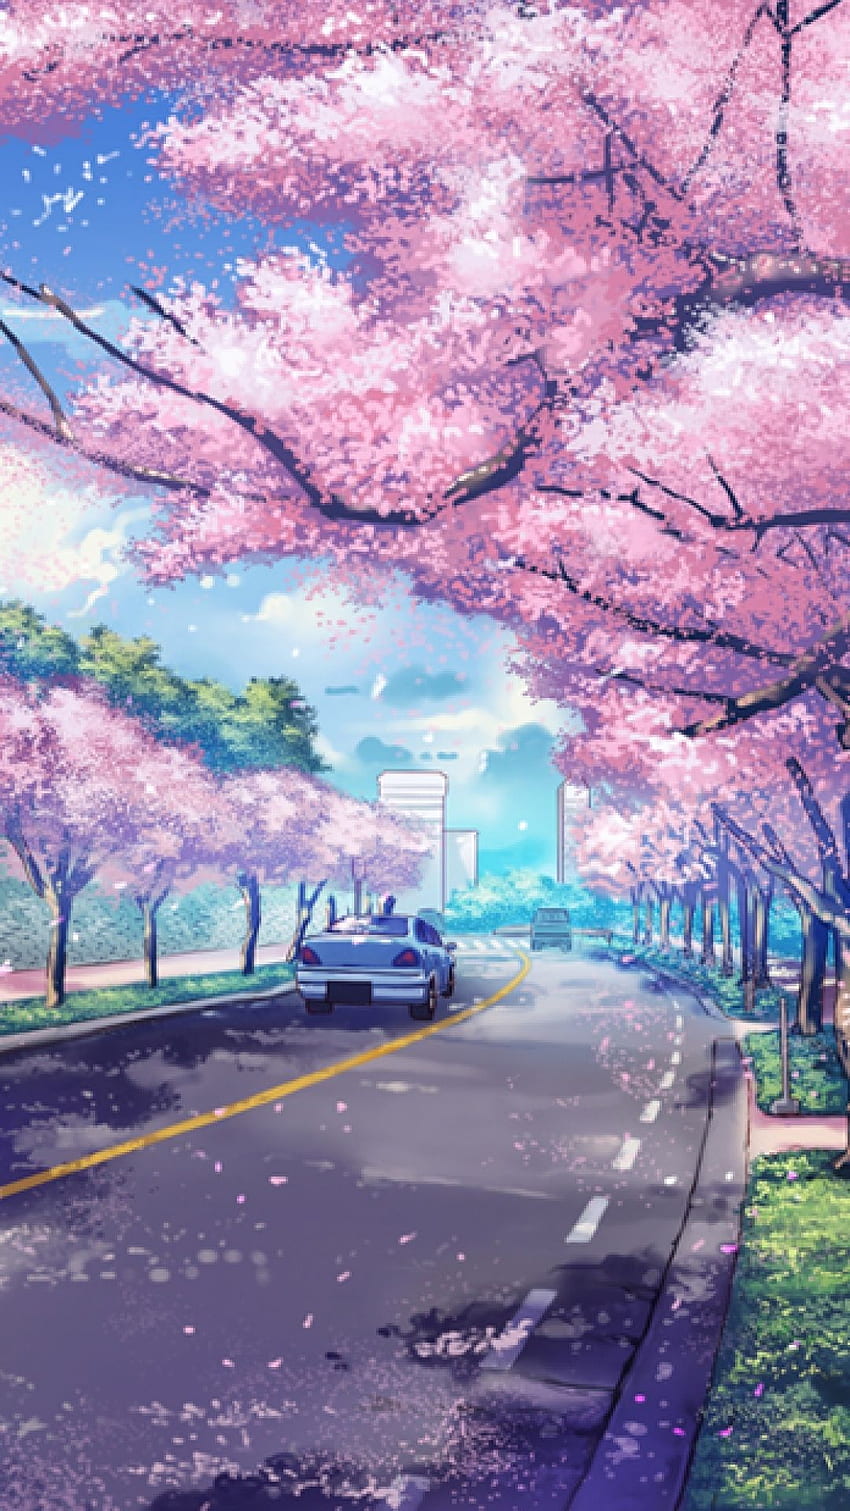 Unique Anime Scenery iPhone Gallery - Anime, Japanese Anime Scenery HD phone wallpaper